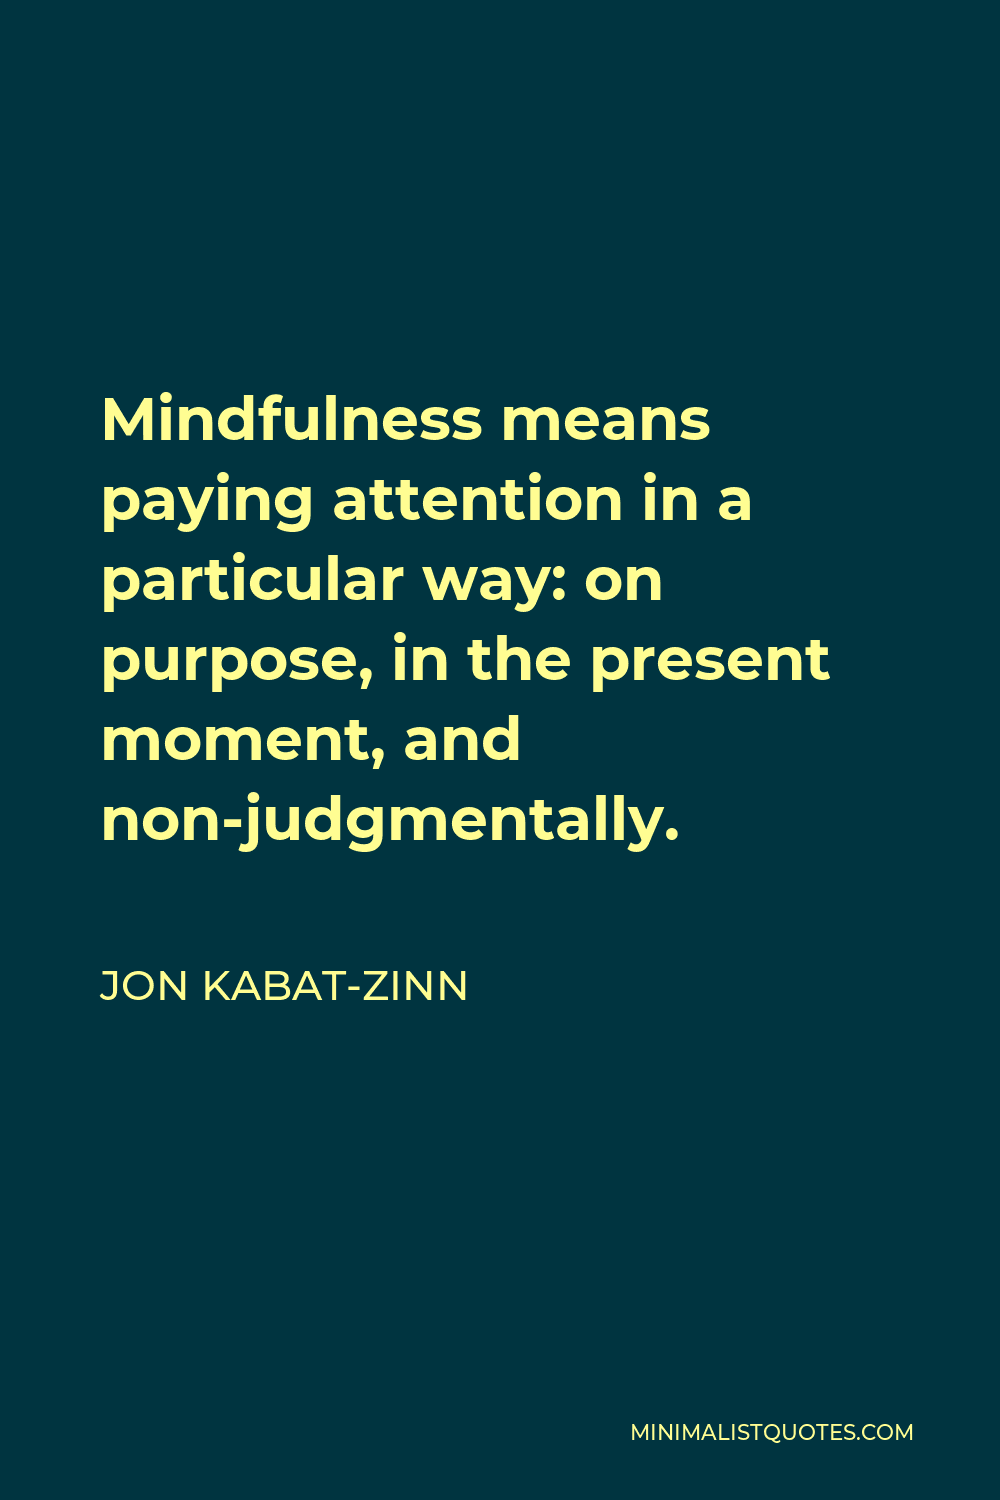 Jon Kabat-Zinn Quote - Mindfulness means paying attention in a particular way: on purpose, in the present moment, and non-judgmentally.